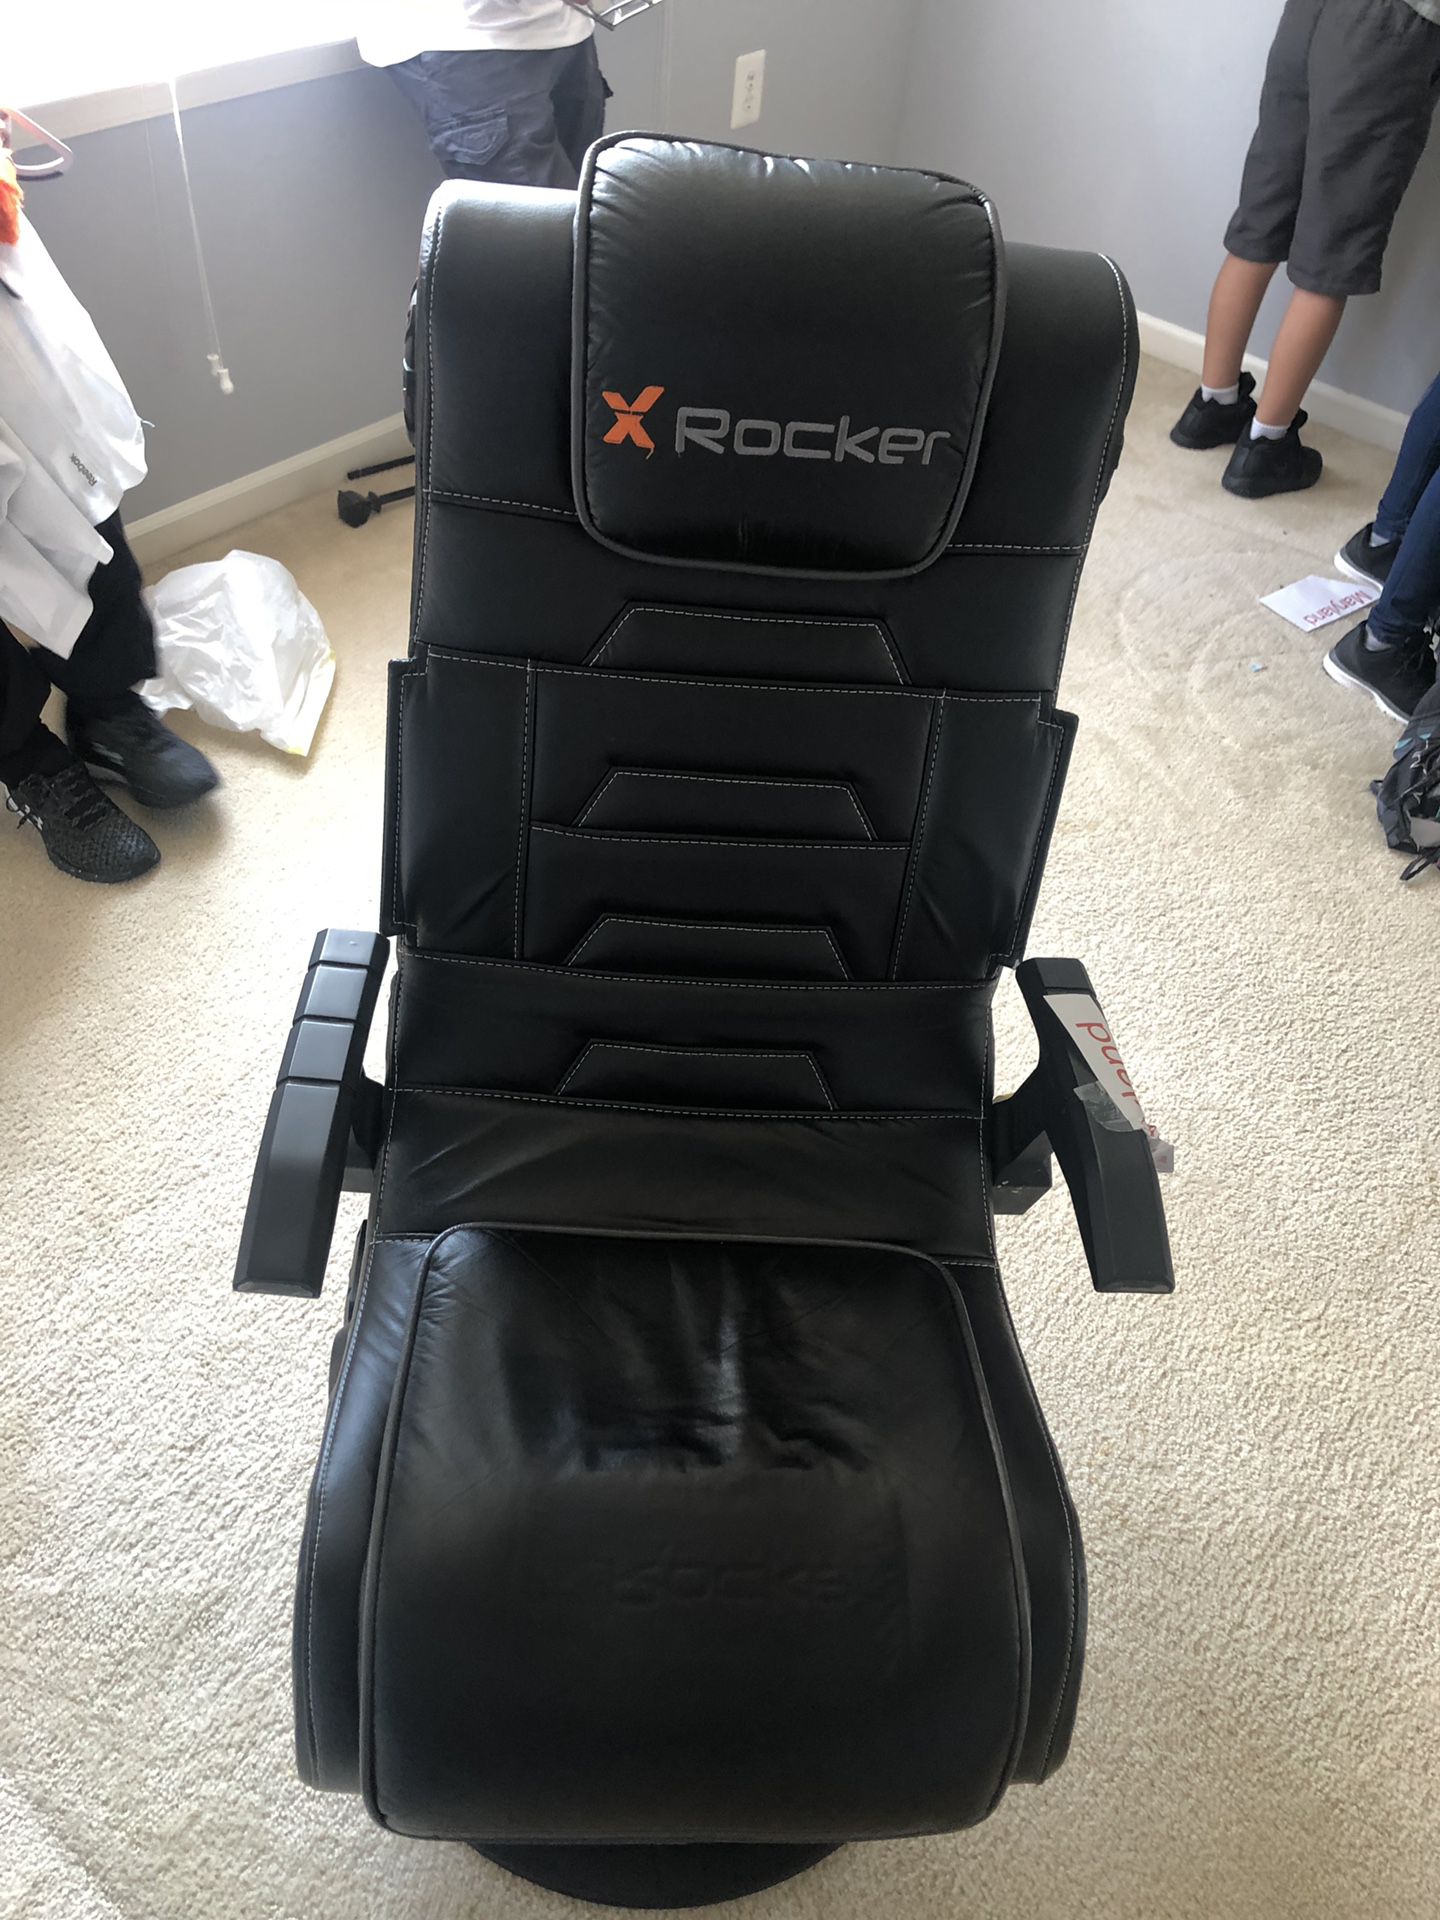 Gaming chair with speakers